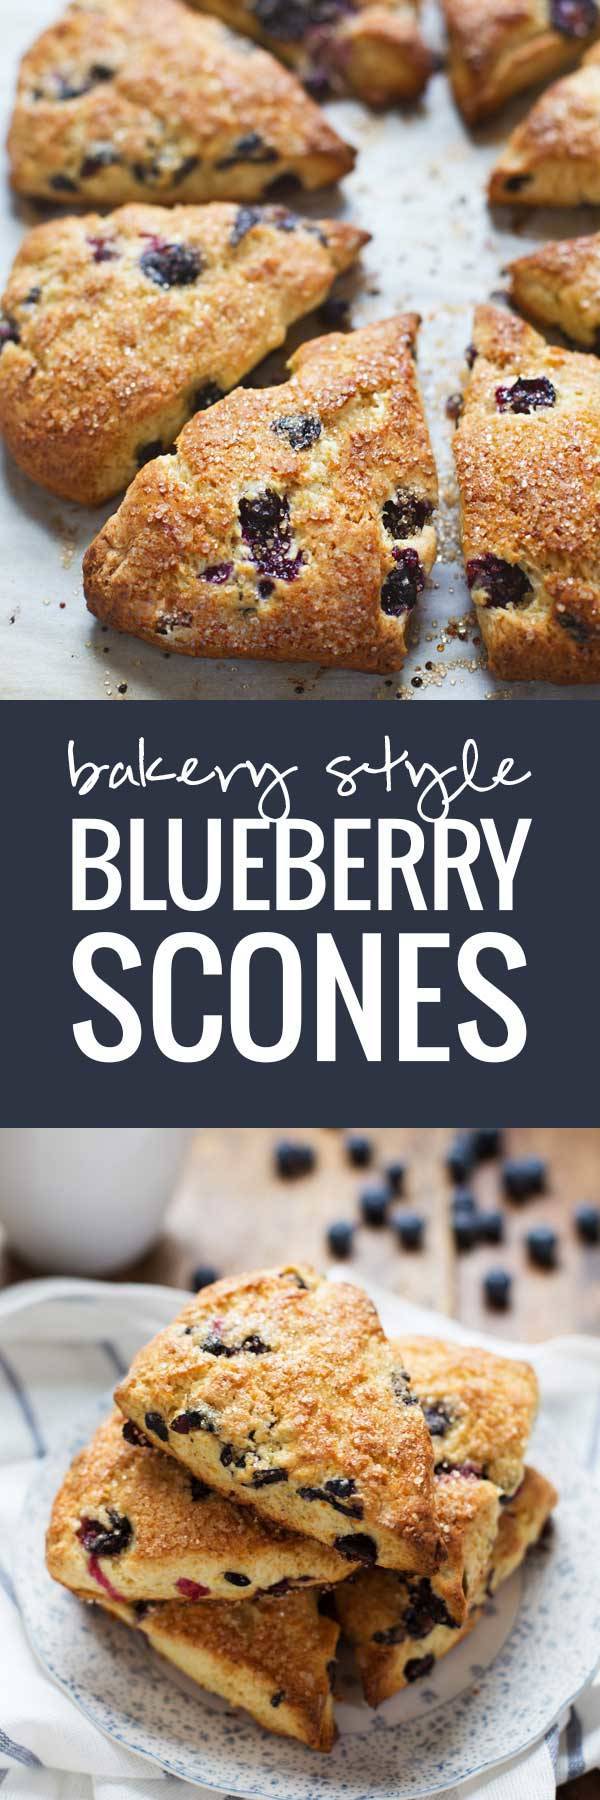 Bakery Style Blueberry Scones - crunchy sugary outside, juicy blueberries + flaky tender inside.